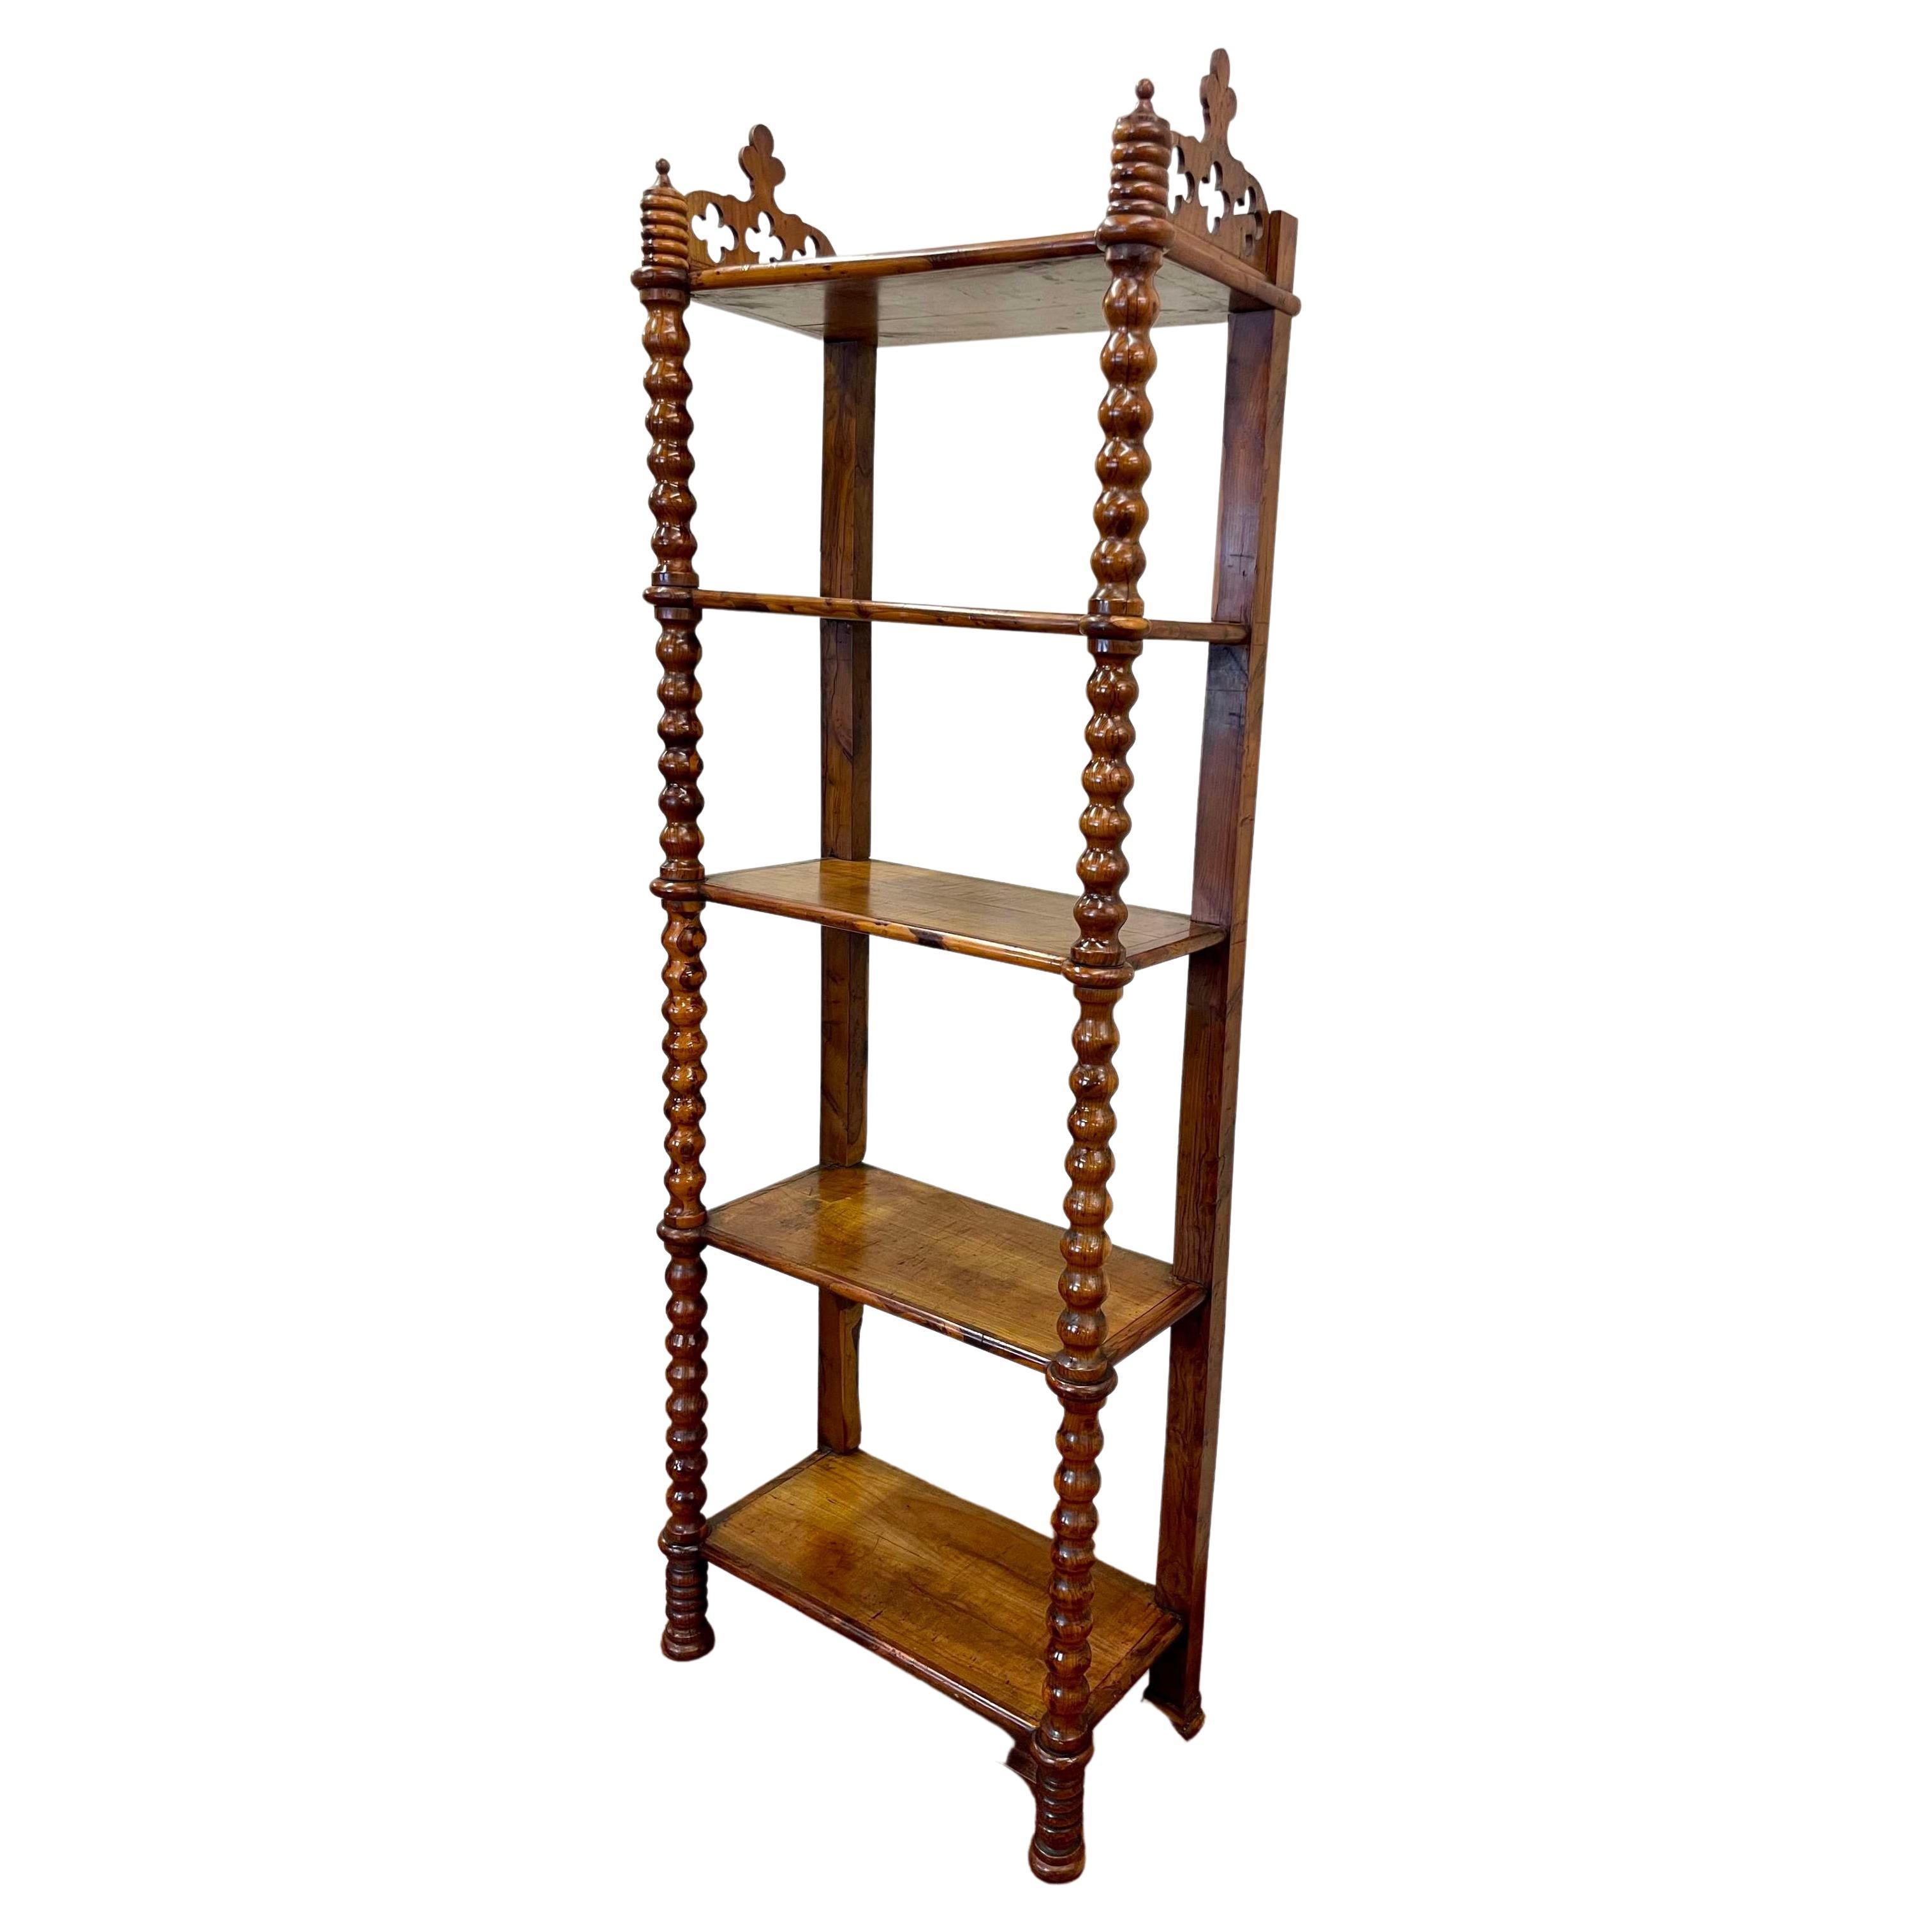 C1890 French Cherry Wood Etagere Shelving Unit For Sale at 1stDibs